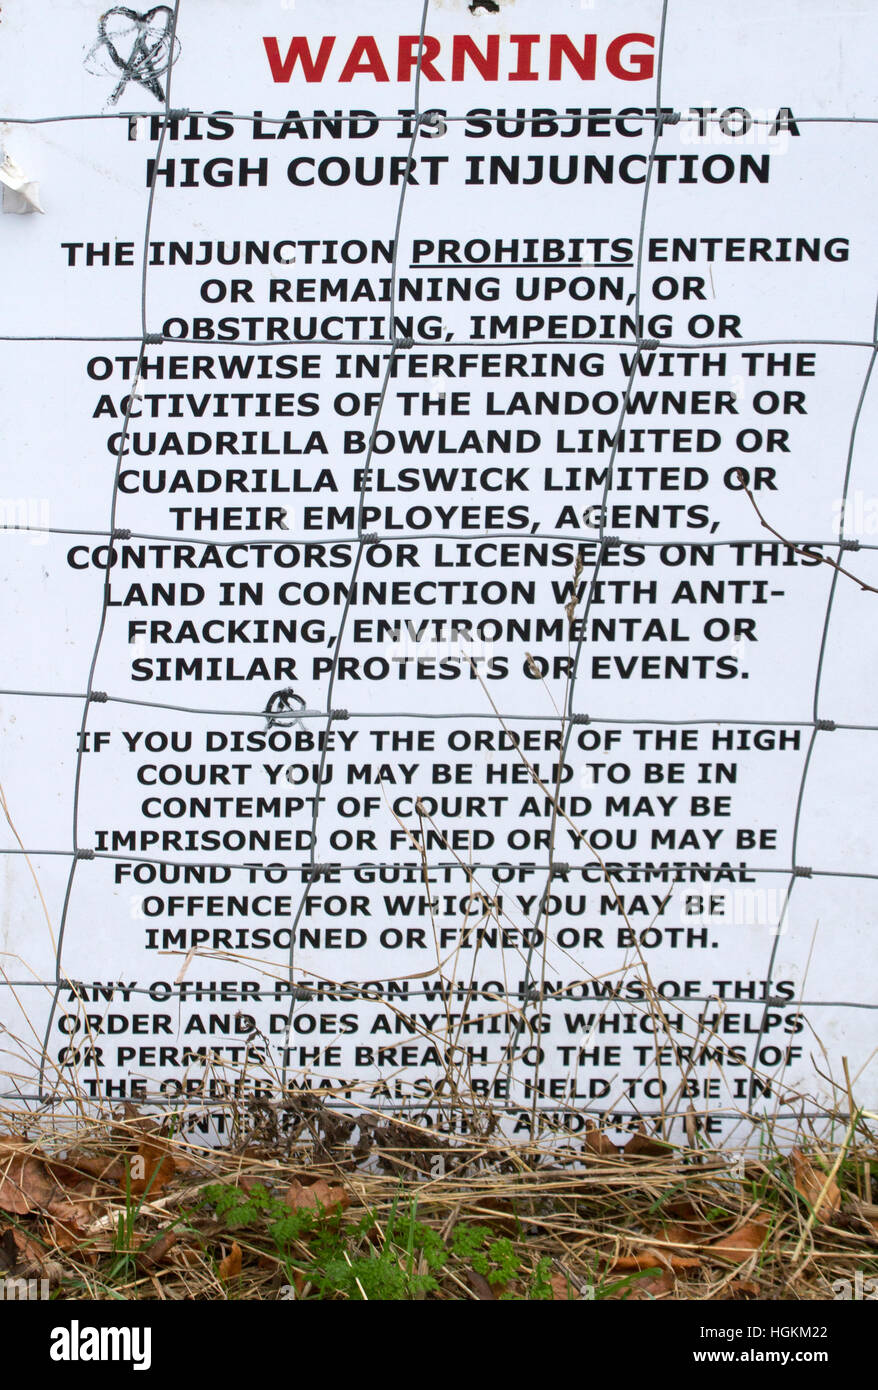 Warning signs about High Court Injunction at the Cuadrilla fracking site at Little Plumpton in Lancashire, UK. Stock Photo